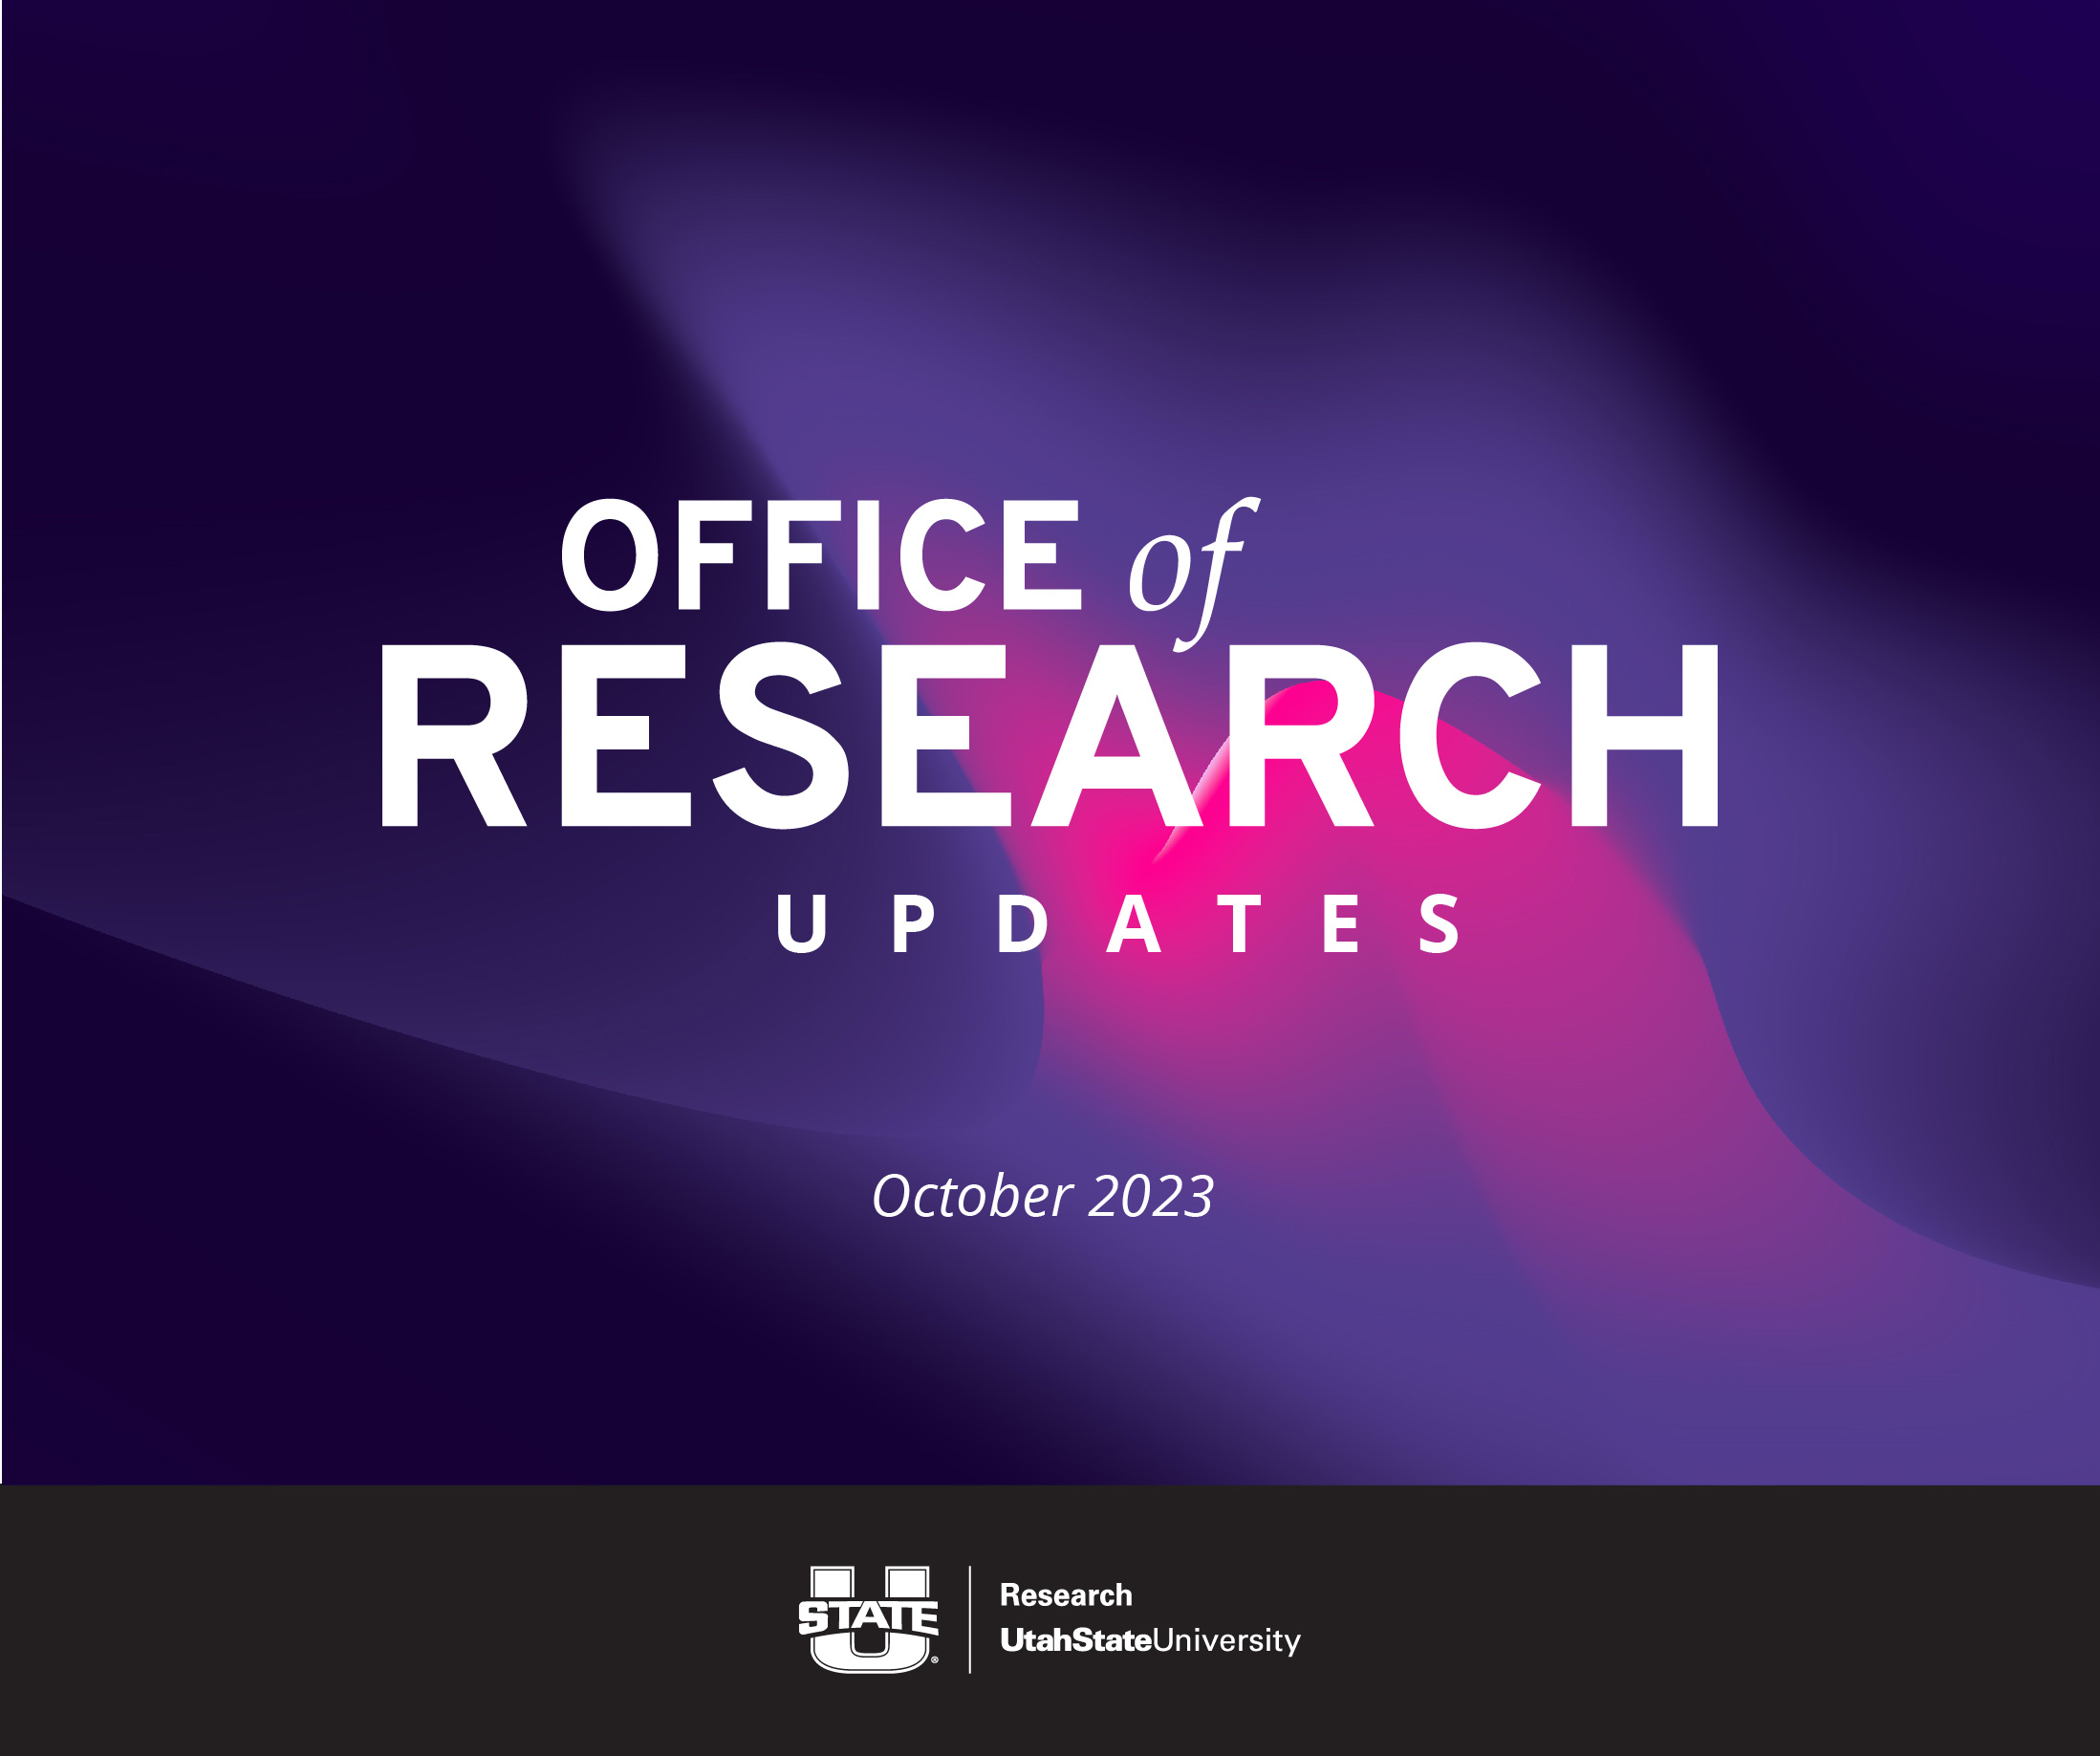 Office of Research Updates October 2023